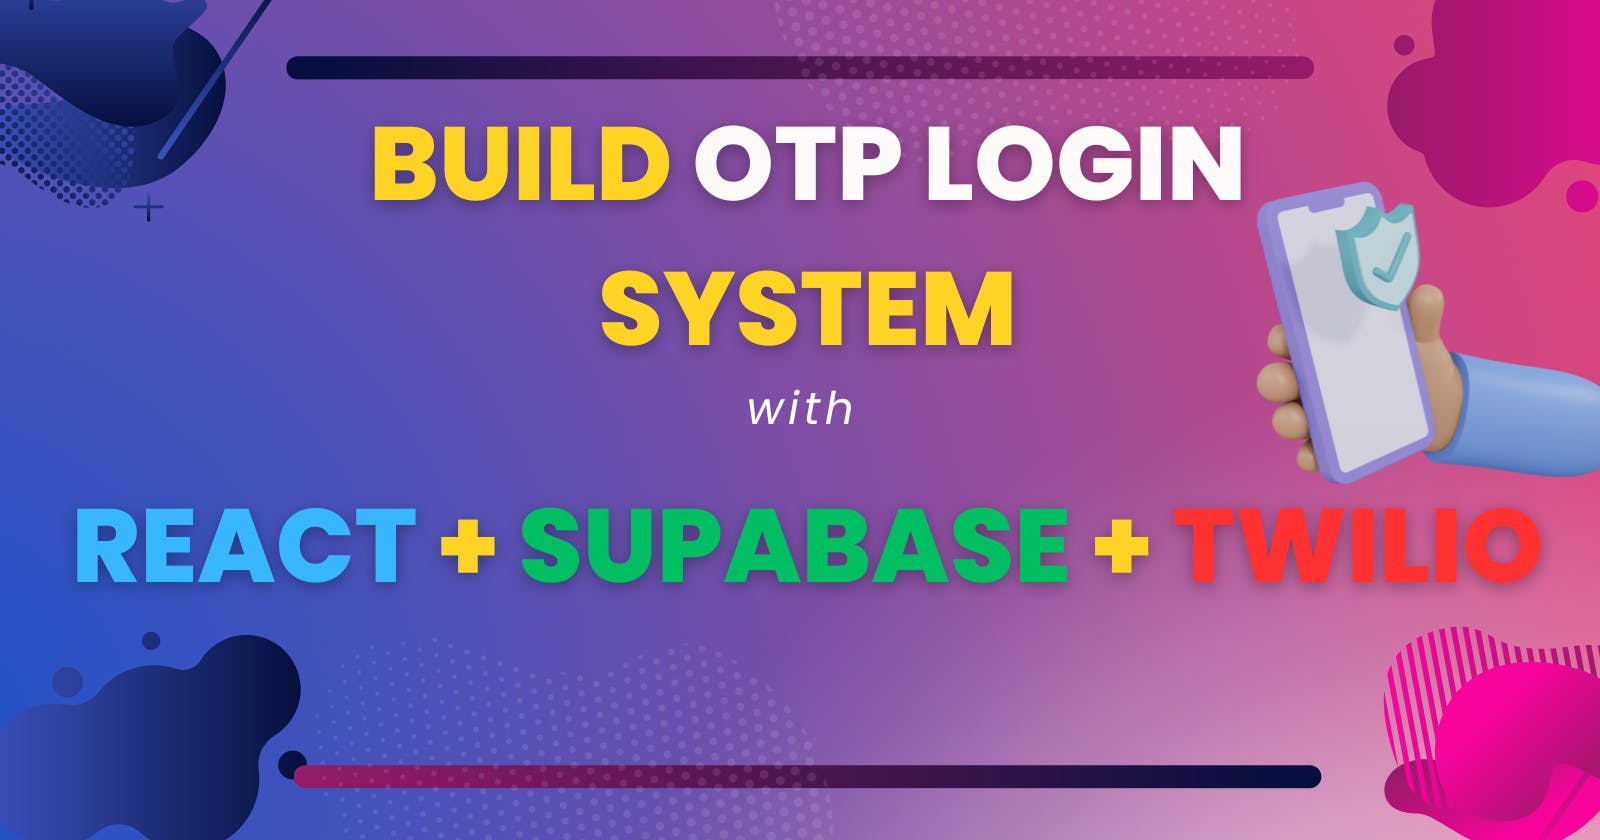 How to build an OTP Login System with React and Supabase